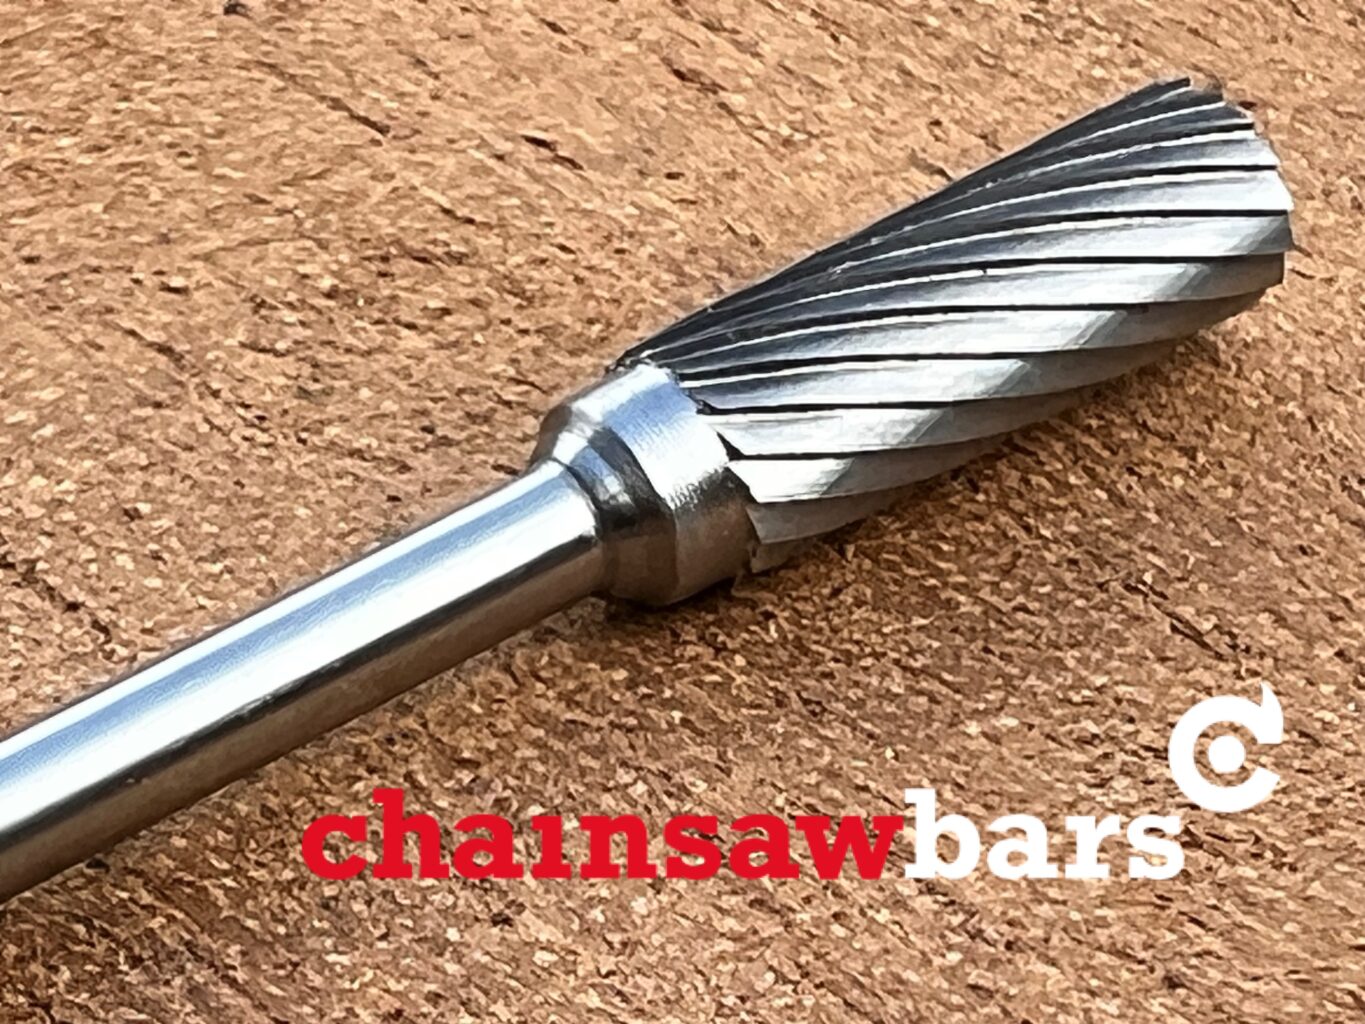 https://www.chainsawbars.co.uk/content/uploads/5.5mm732-Carbide-Sharpening-Burr-Sharpens-.404-and-38-Chains-scaled.jpg